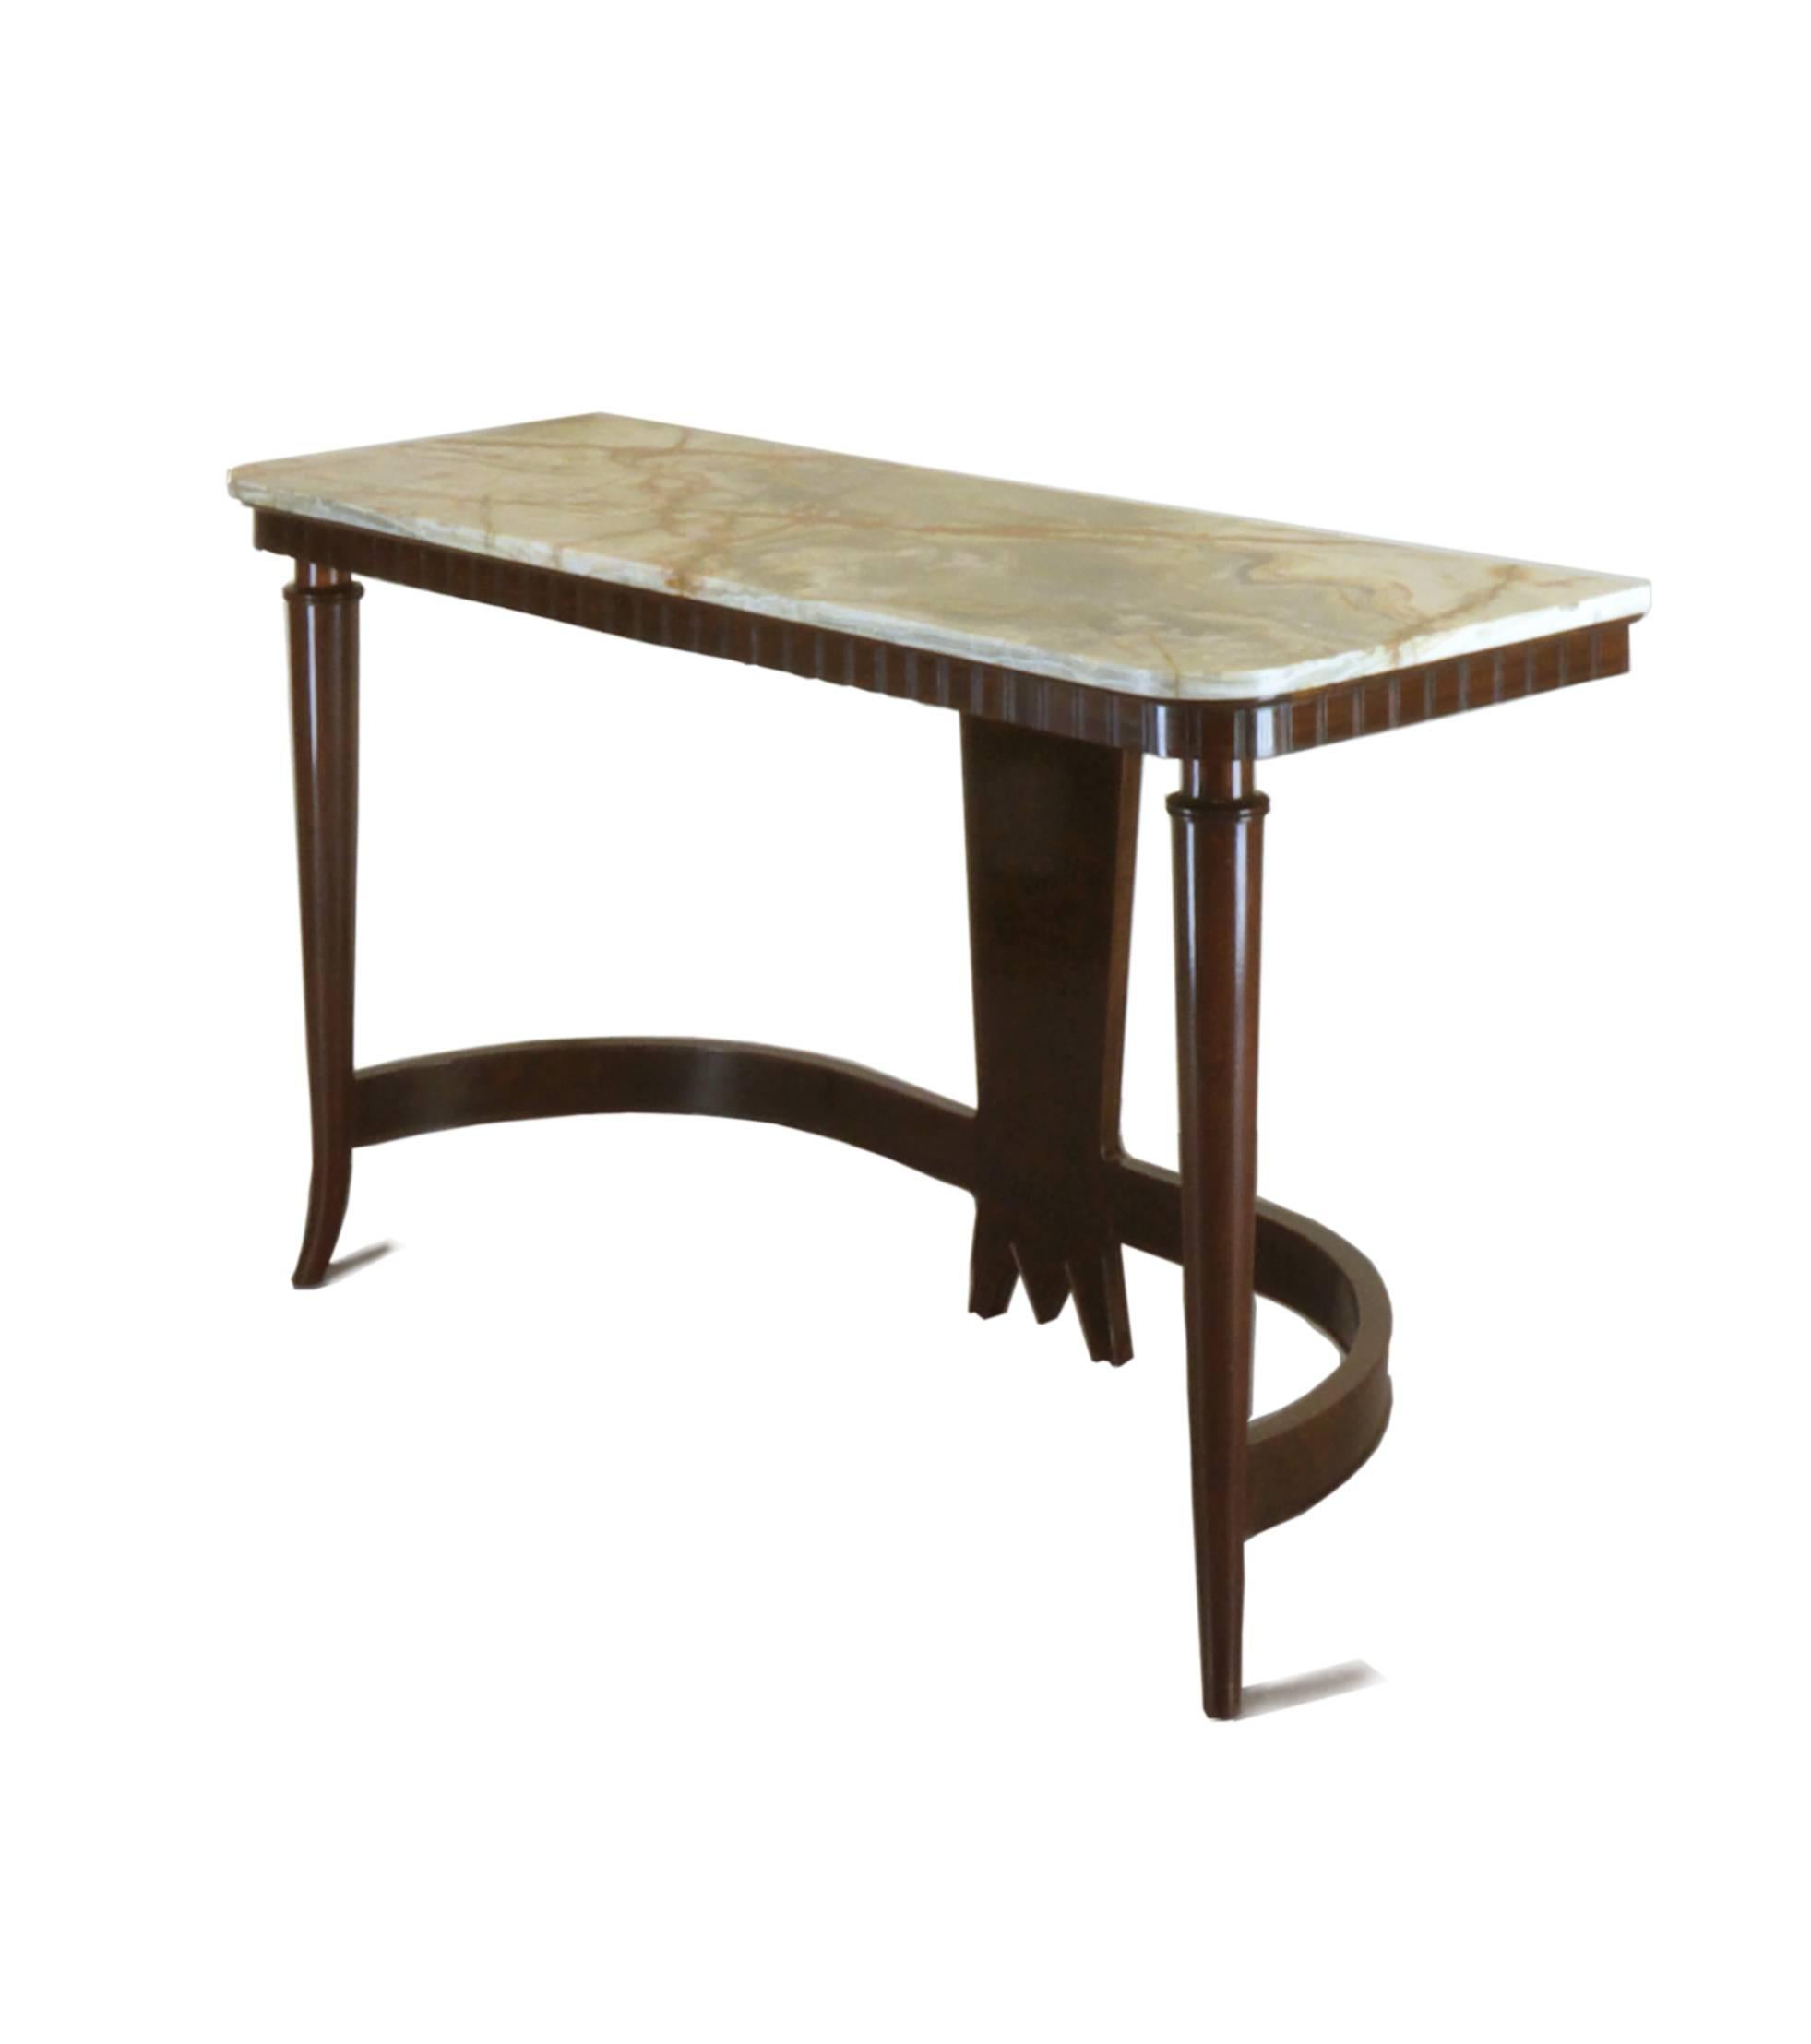 A walnut and onyx console table by Luigi Scremin. Combining elements of neoclassical and medieval design.